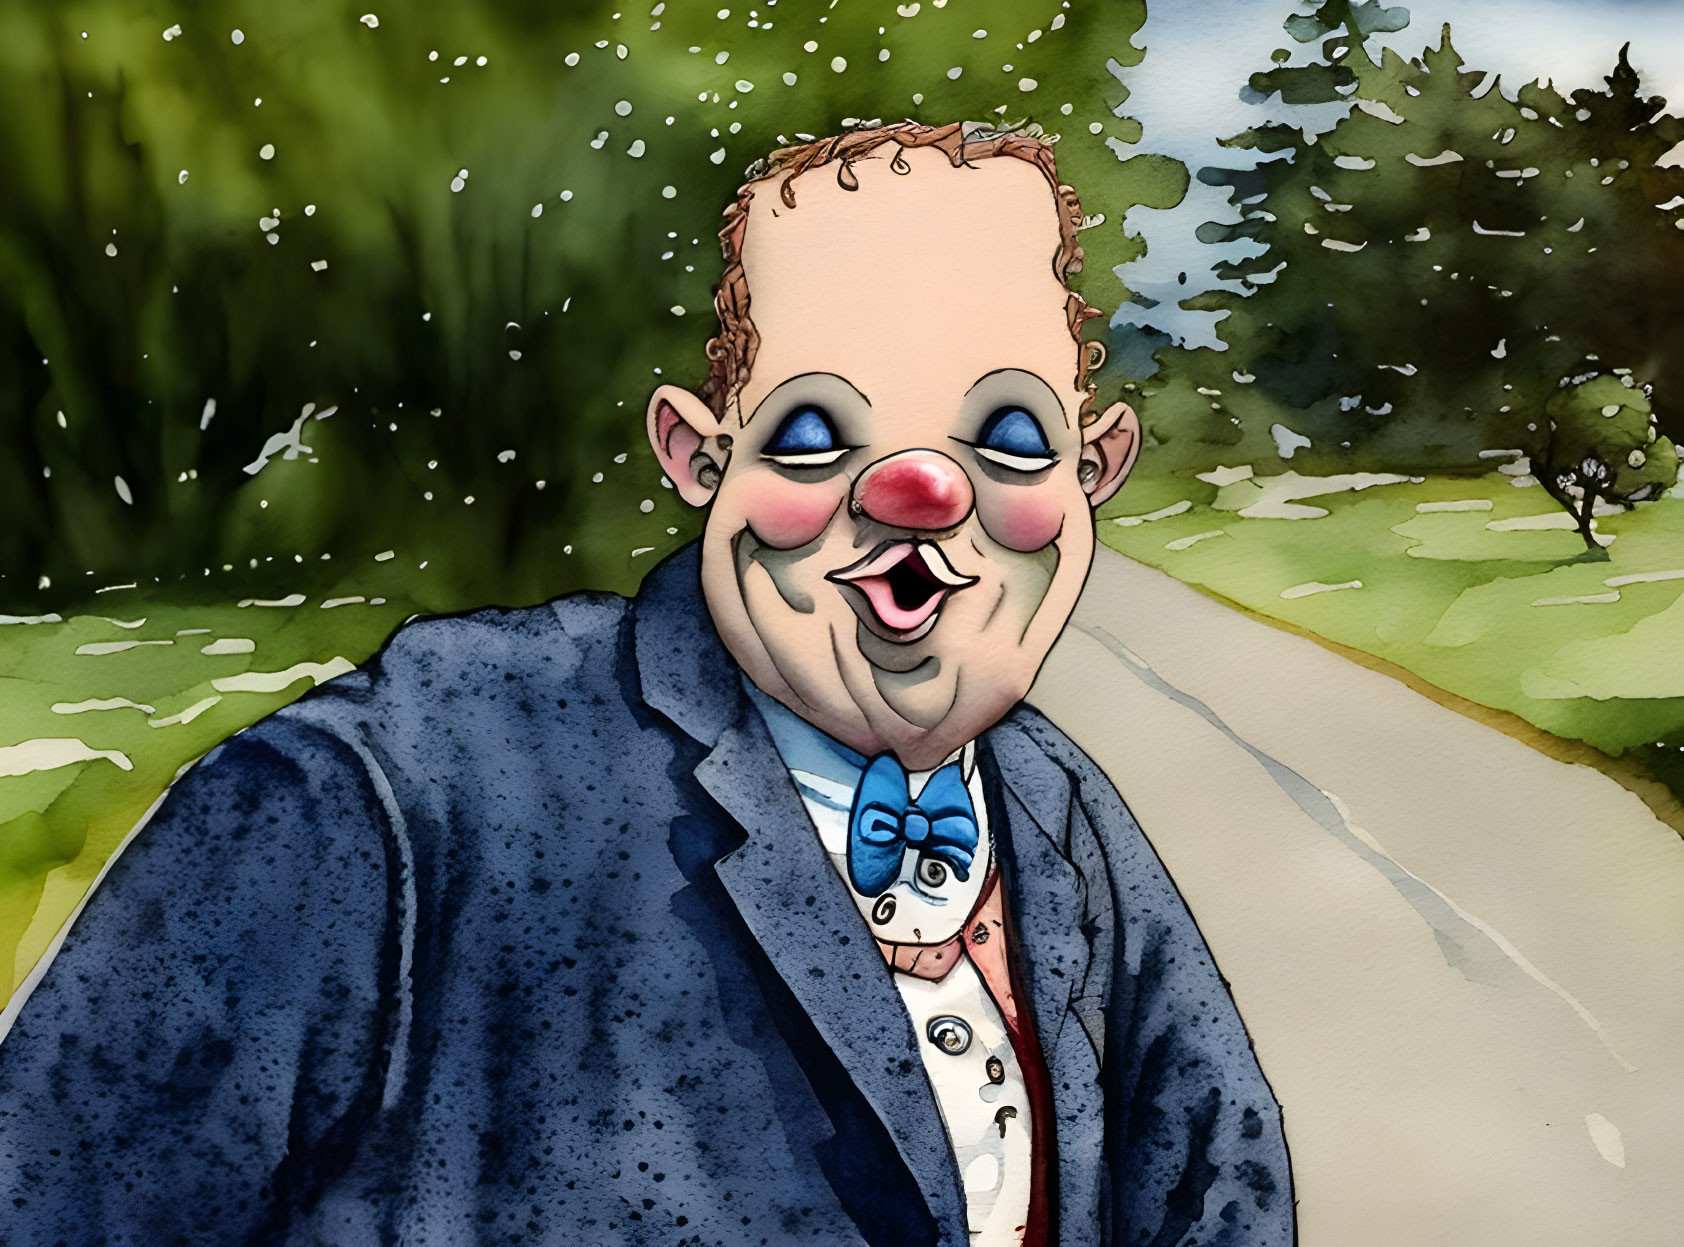 Colorful Clown Illustration in Park Setting